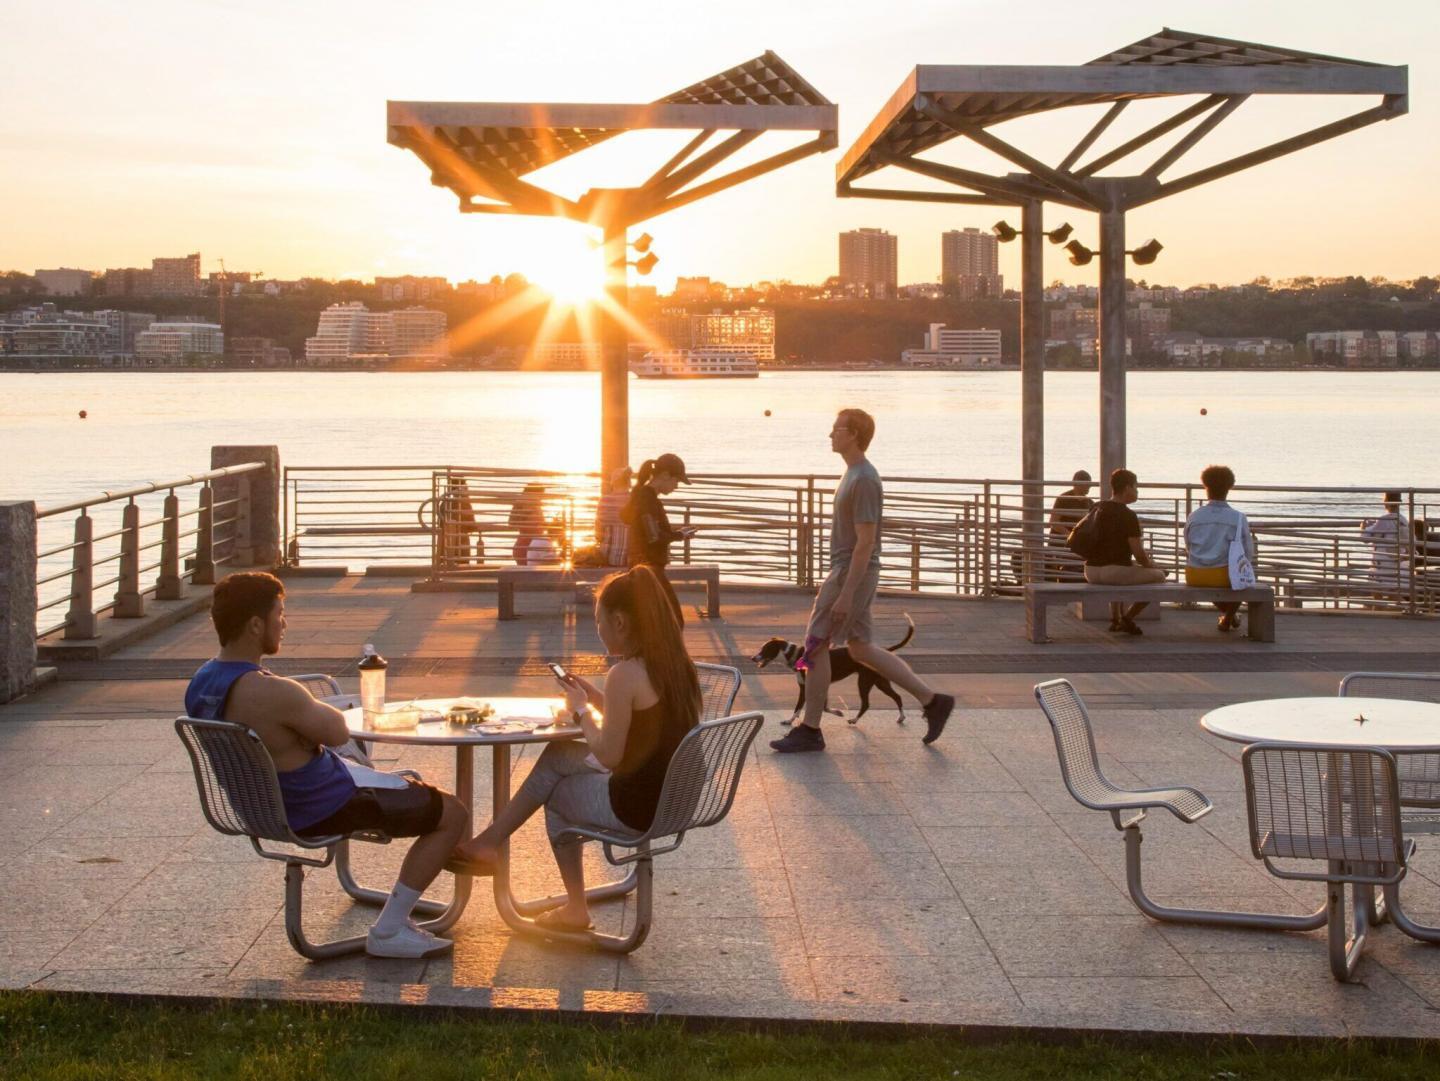 The seating area at Pier 95 at sunset